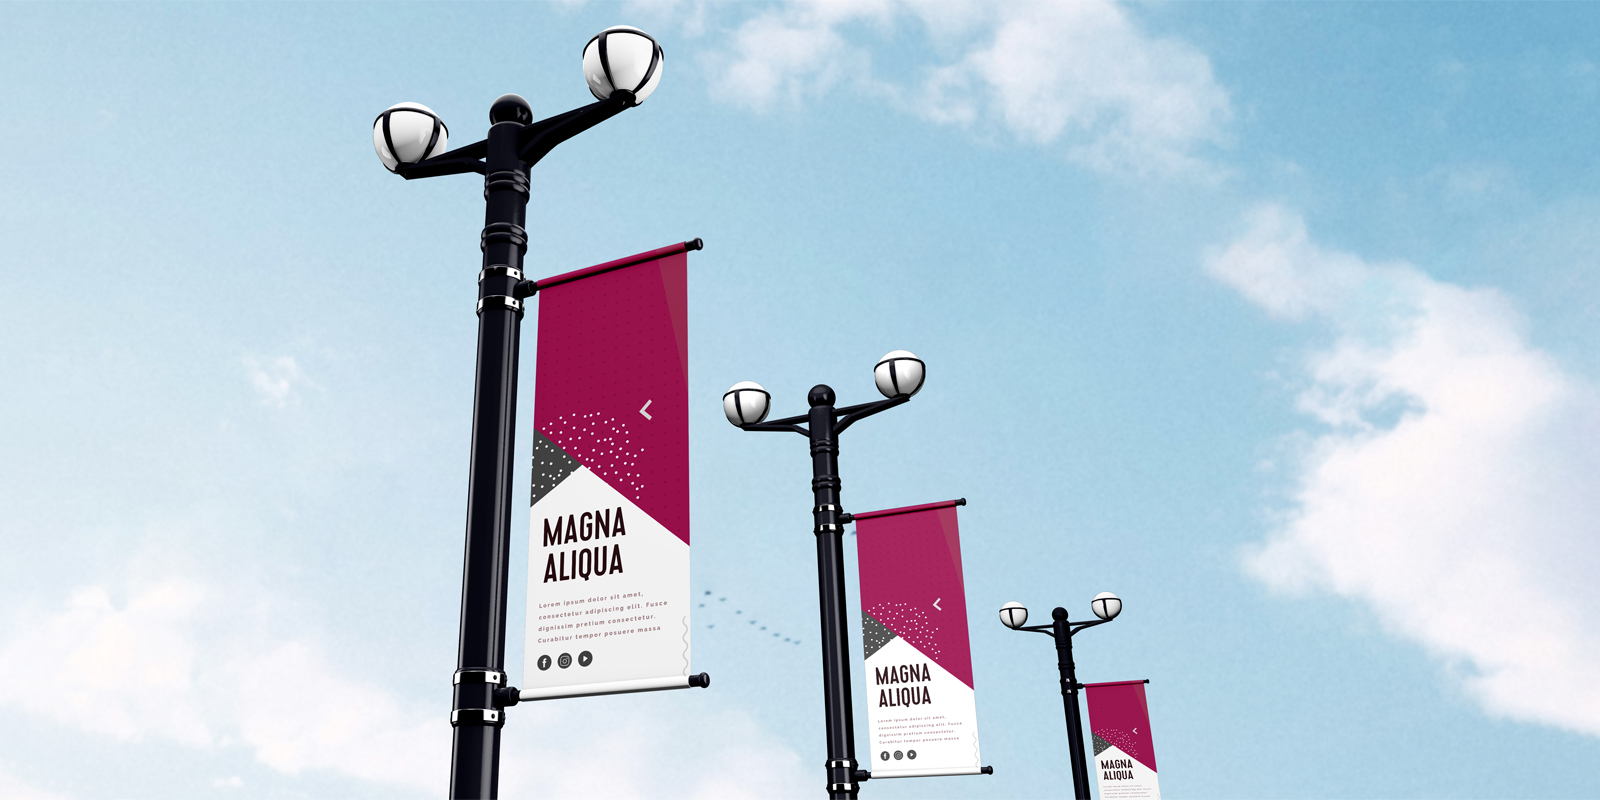 Pole banners in Geelong - Print with Pagerr